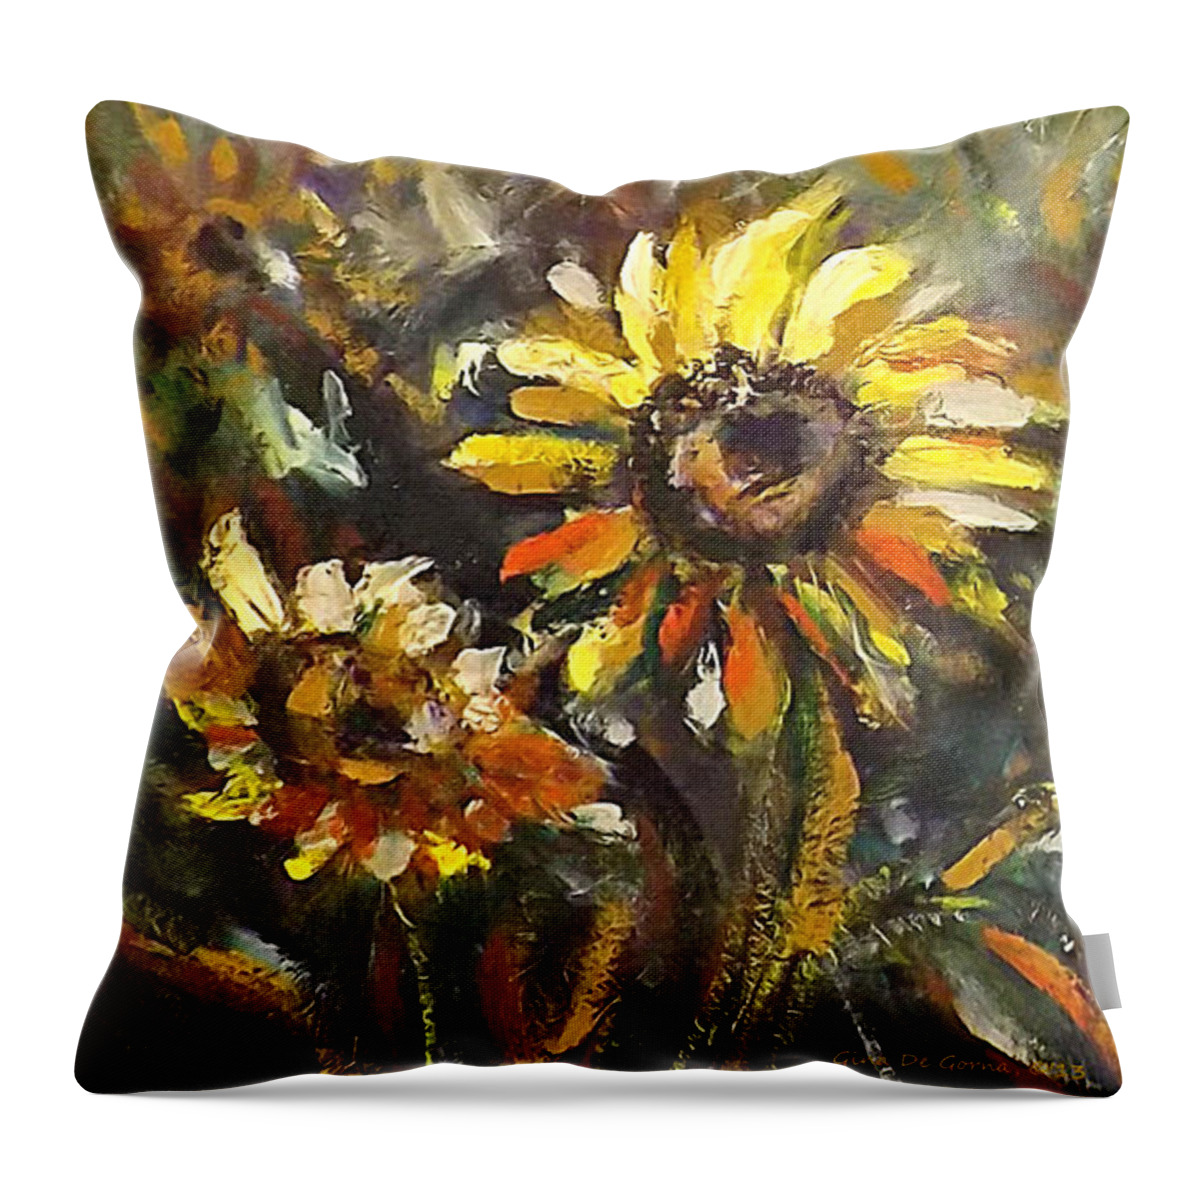 Sunflowers Throw Pillow featuring the painting Sunny 2 by Gina De Gorna